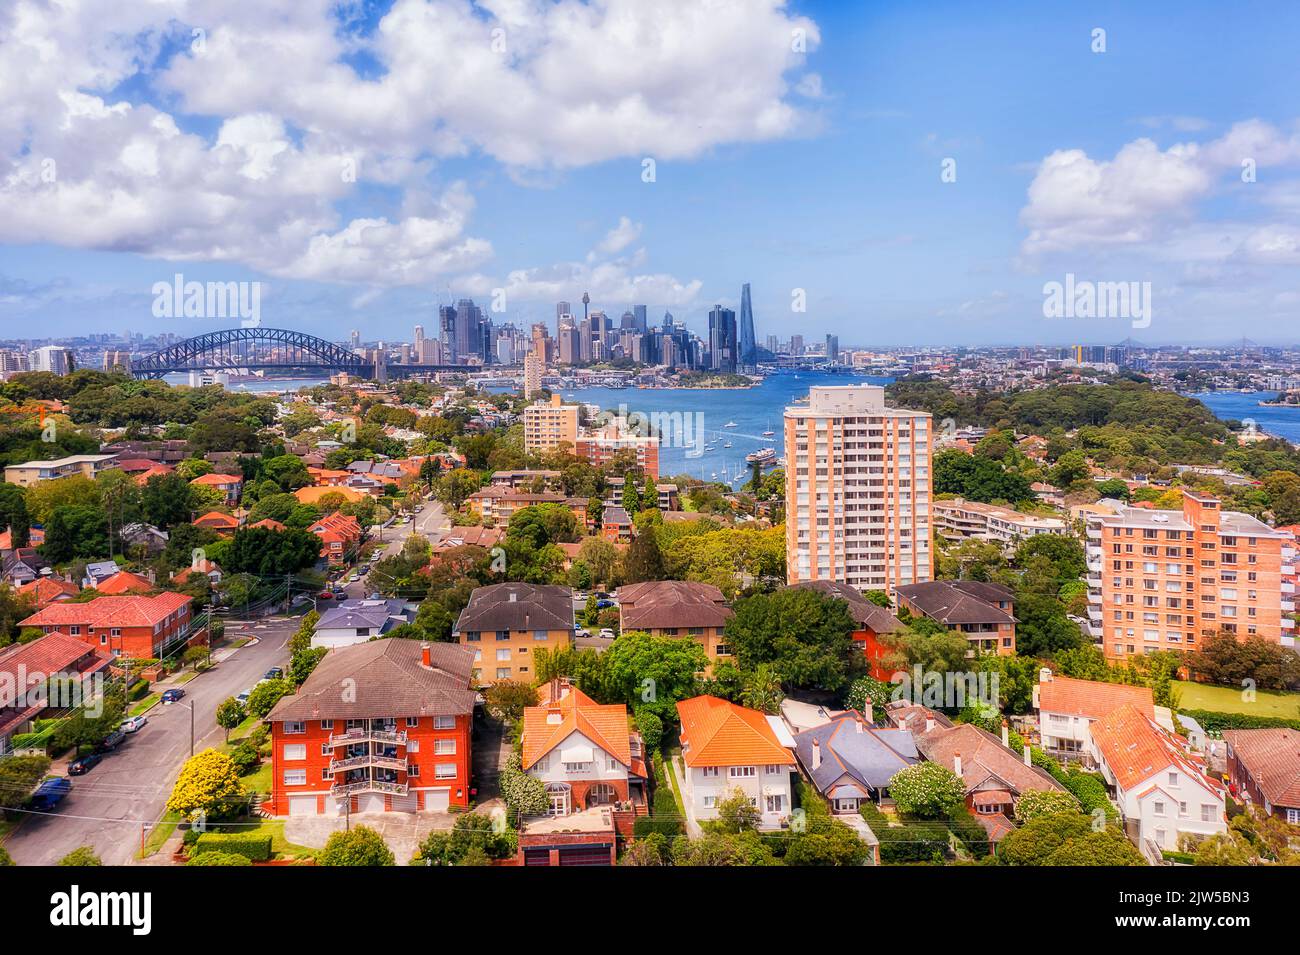 Local residential low-rise houses in green wealthy suburb of North Sydney in view of Sydney harbour bridge and city CBD landmarks - aerial cityscape. Stock Photo